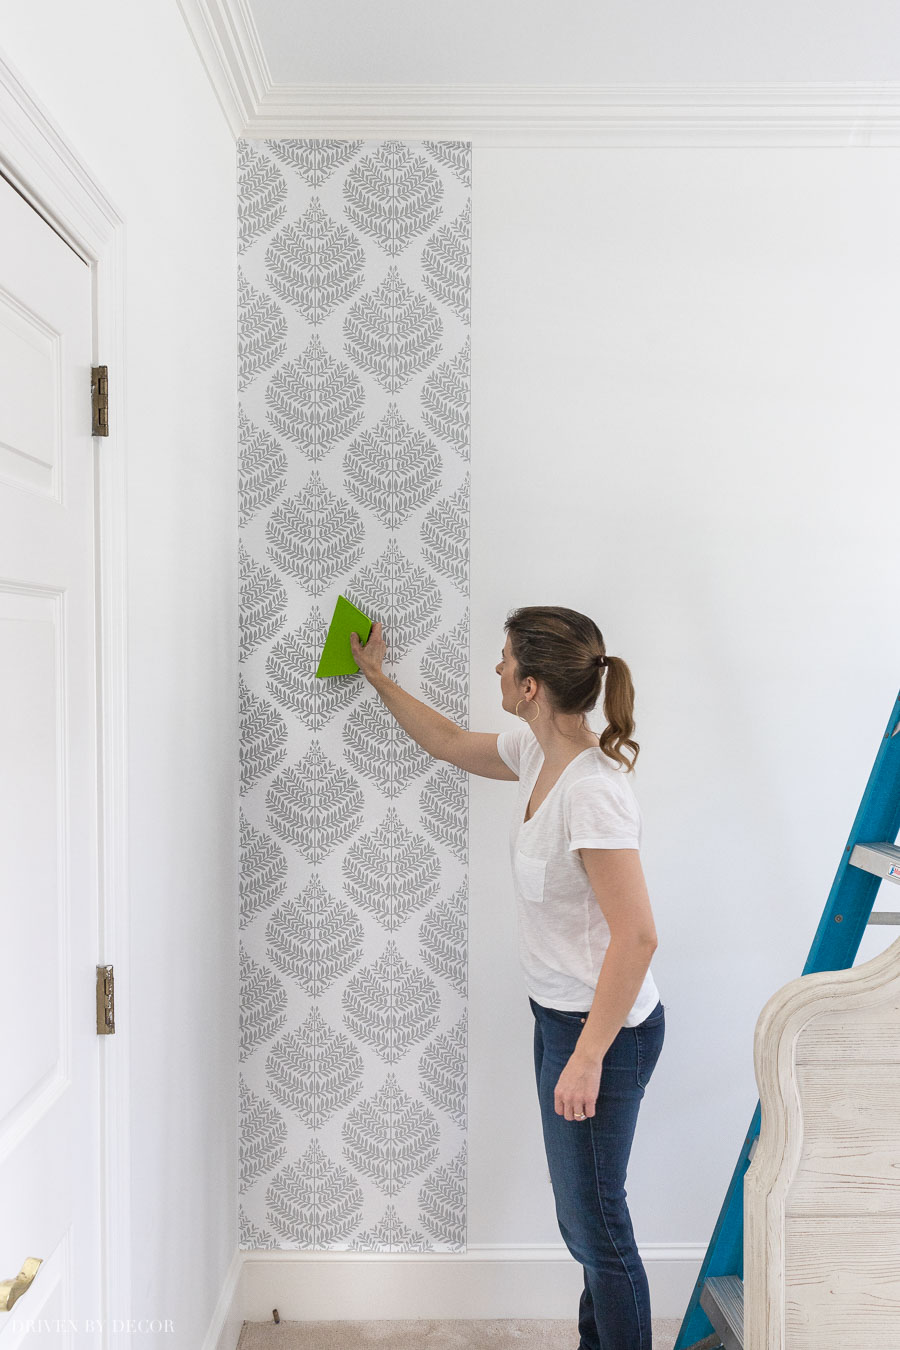 Peel & Stick Wallpaper: Everything You Need to Know! - Driven by Decor